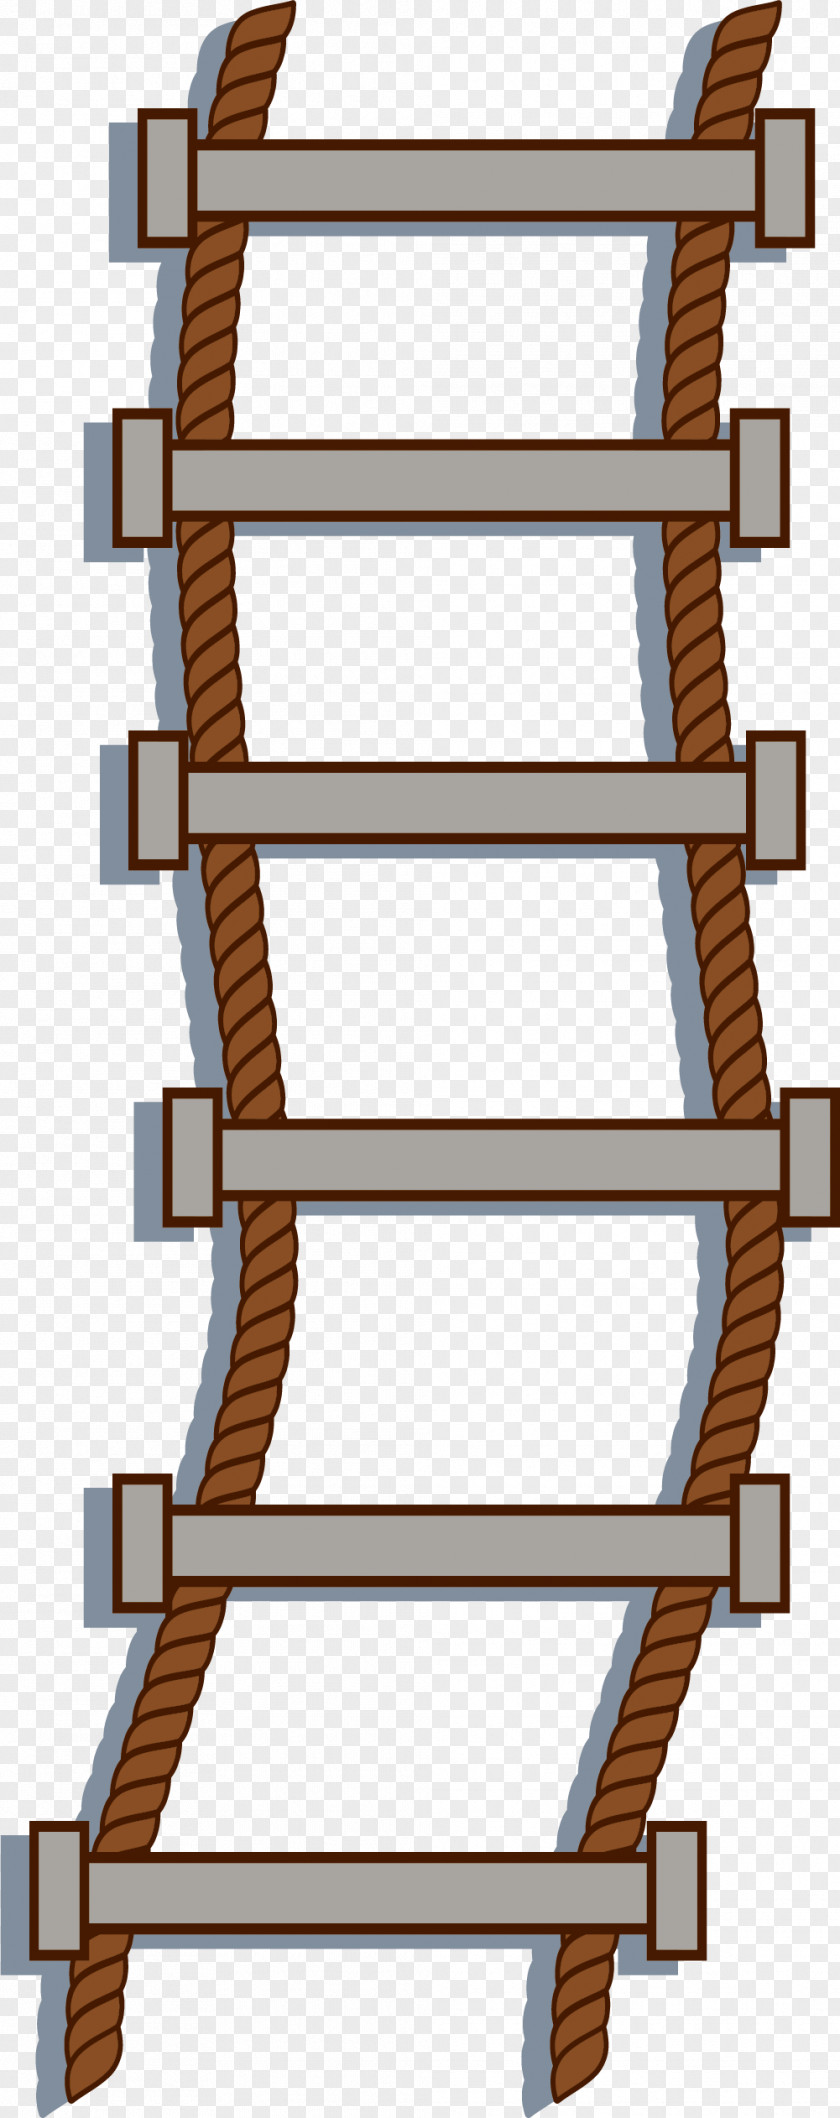 Iron Ladder Stairs Repstege PNG